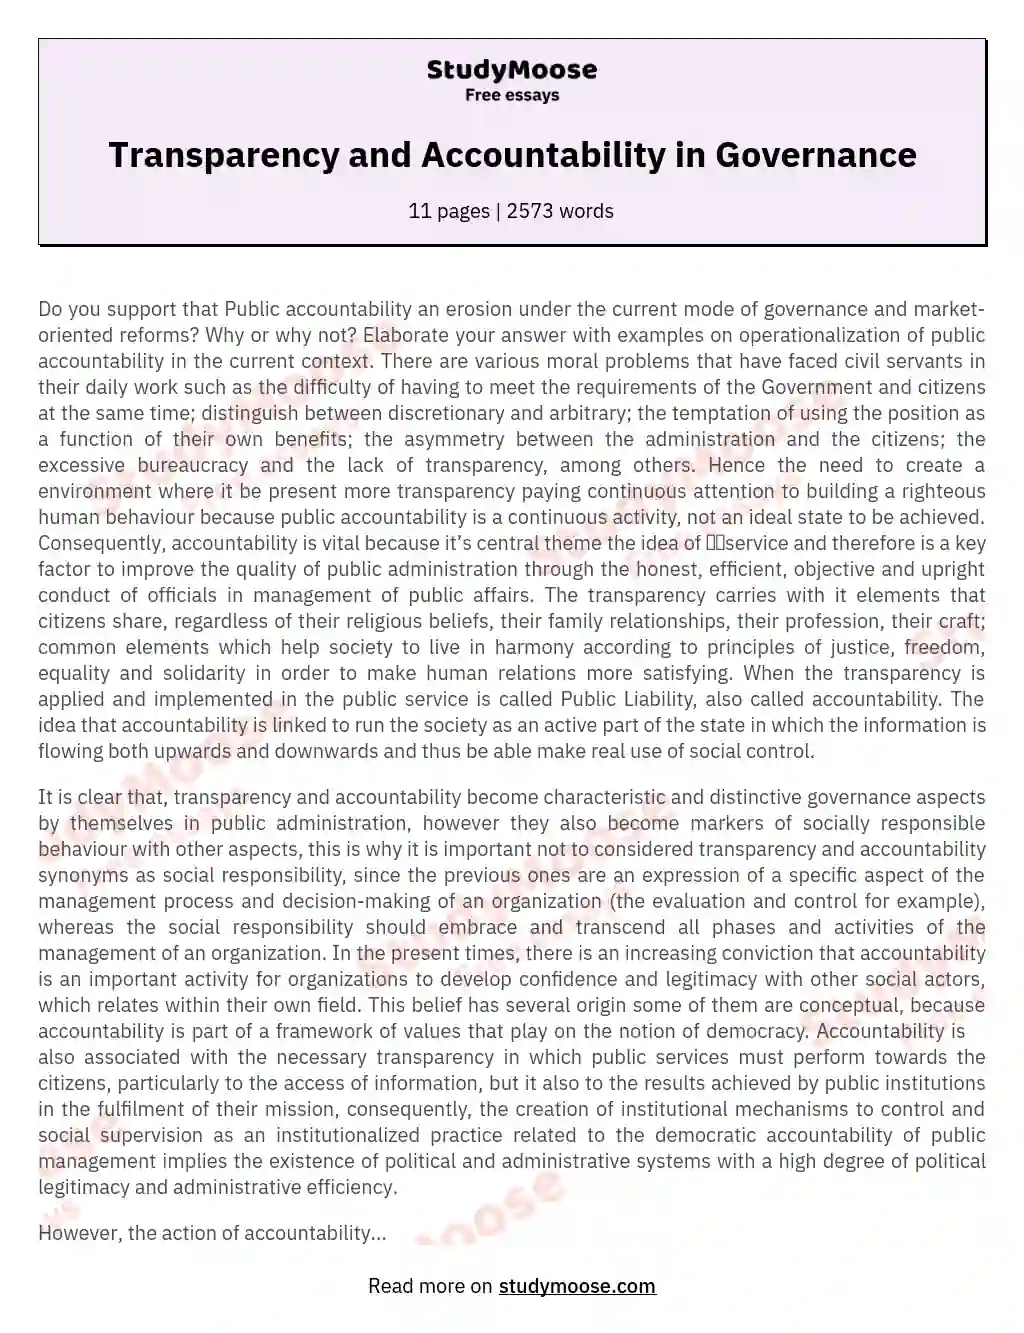 Transparency and Accountability in Governance essay